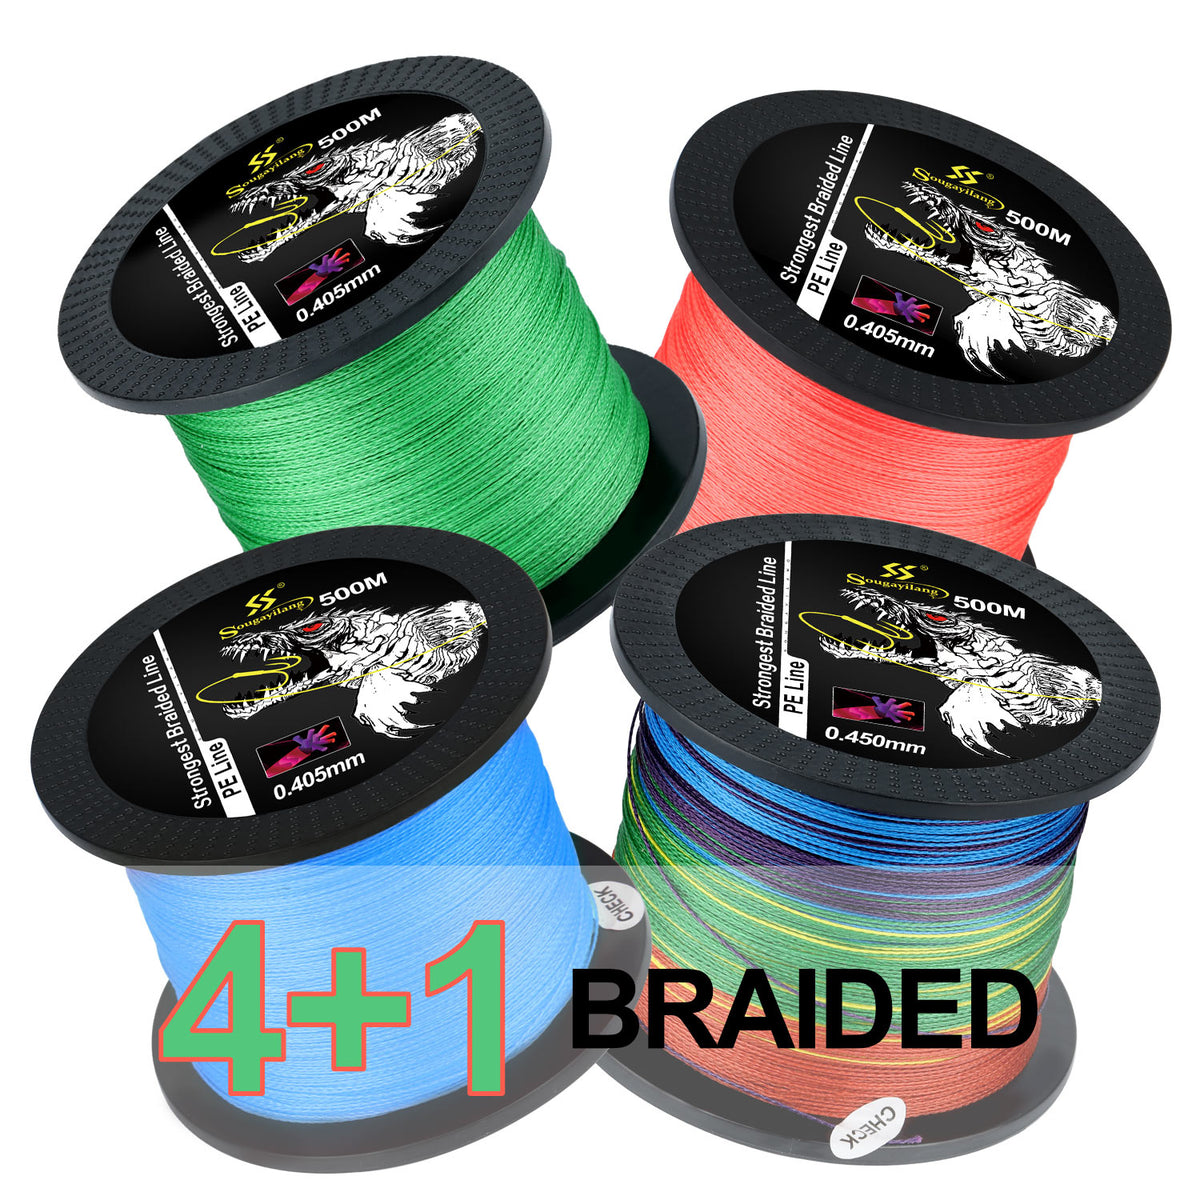 Sougayilang 150M 500M Multicolour PE Braided Fishing Line 4 Strands  Multifilament Japanese Fishing Line for Freshwater Saltwater